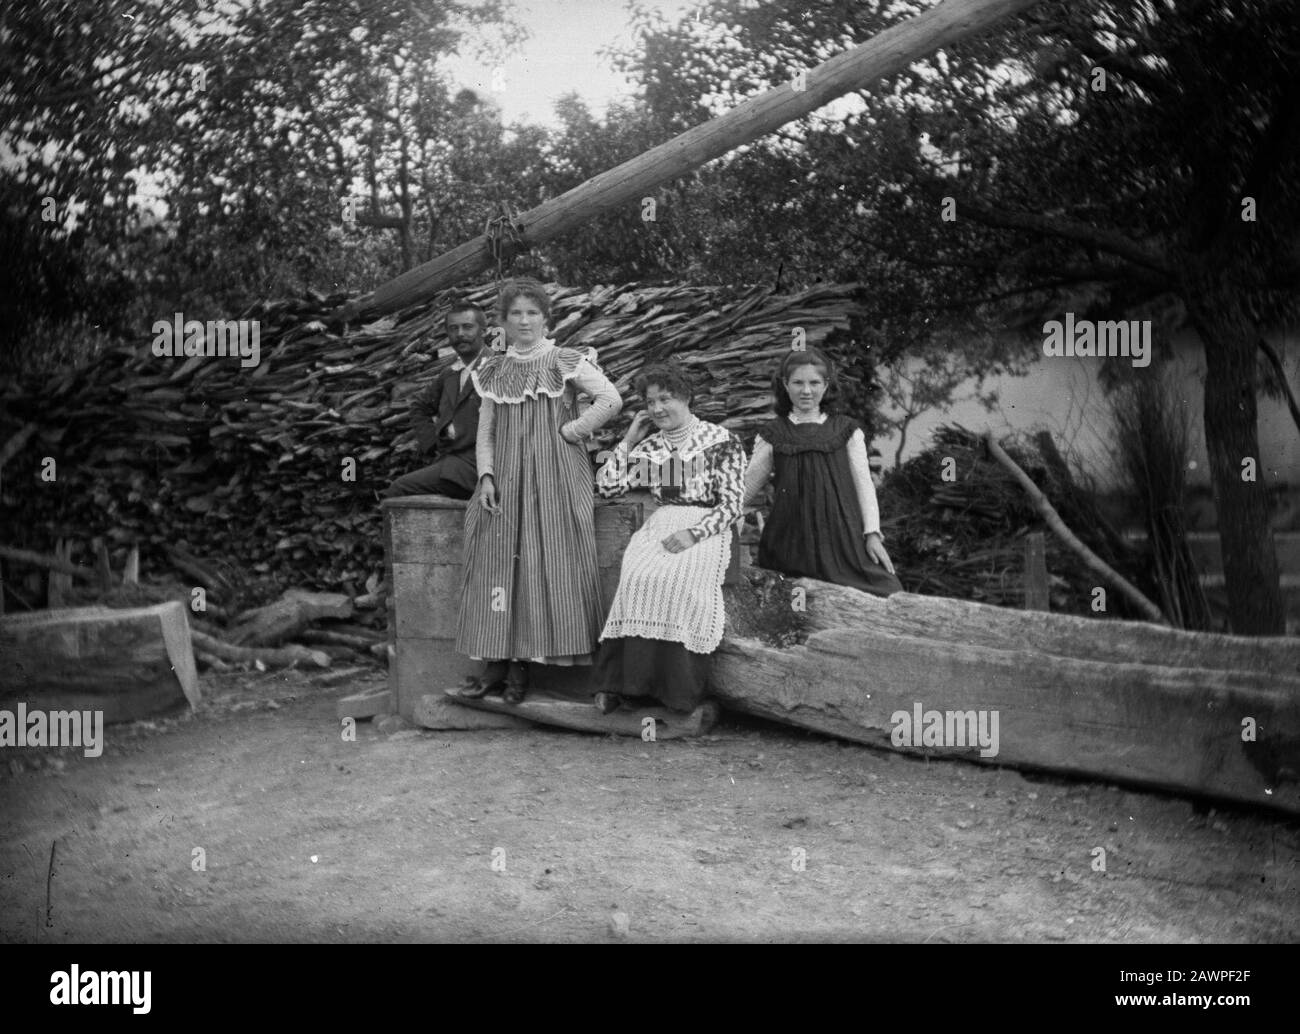 Family, village, shadoof, water trough, summer, tableau Fortepan 2518. Stock Photo